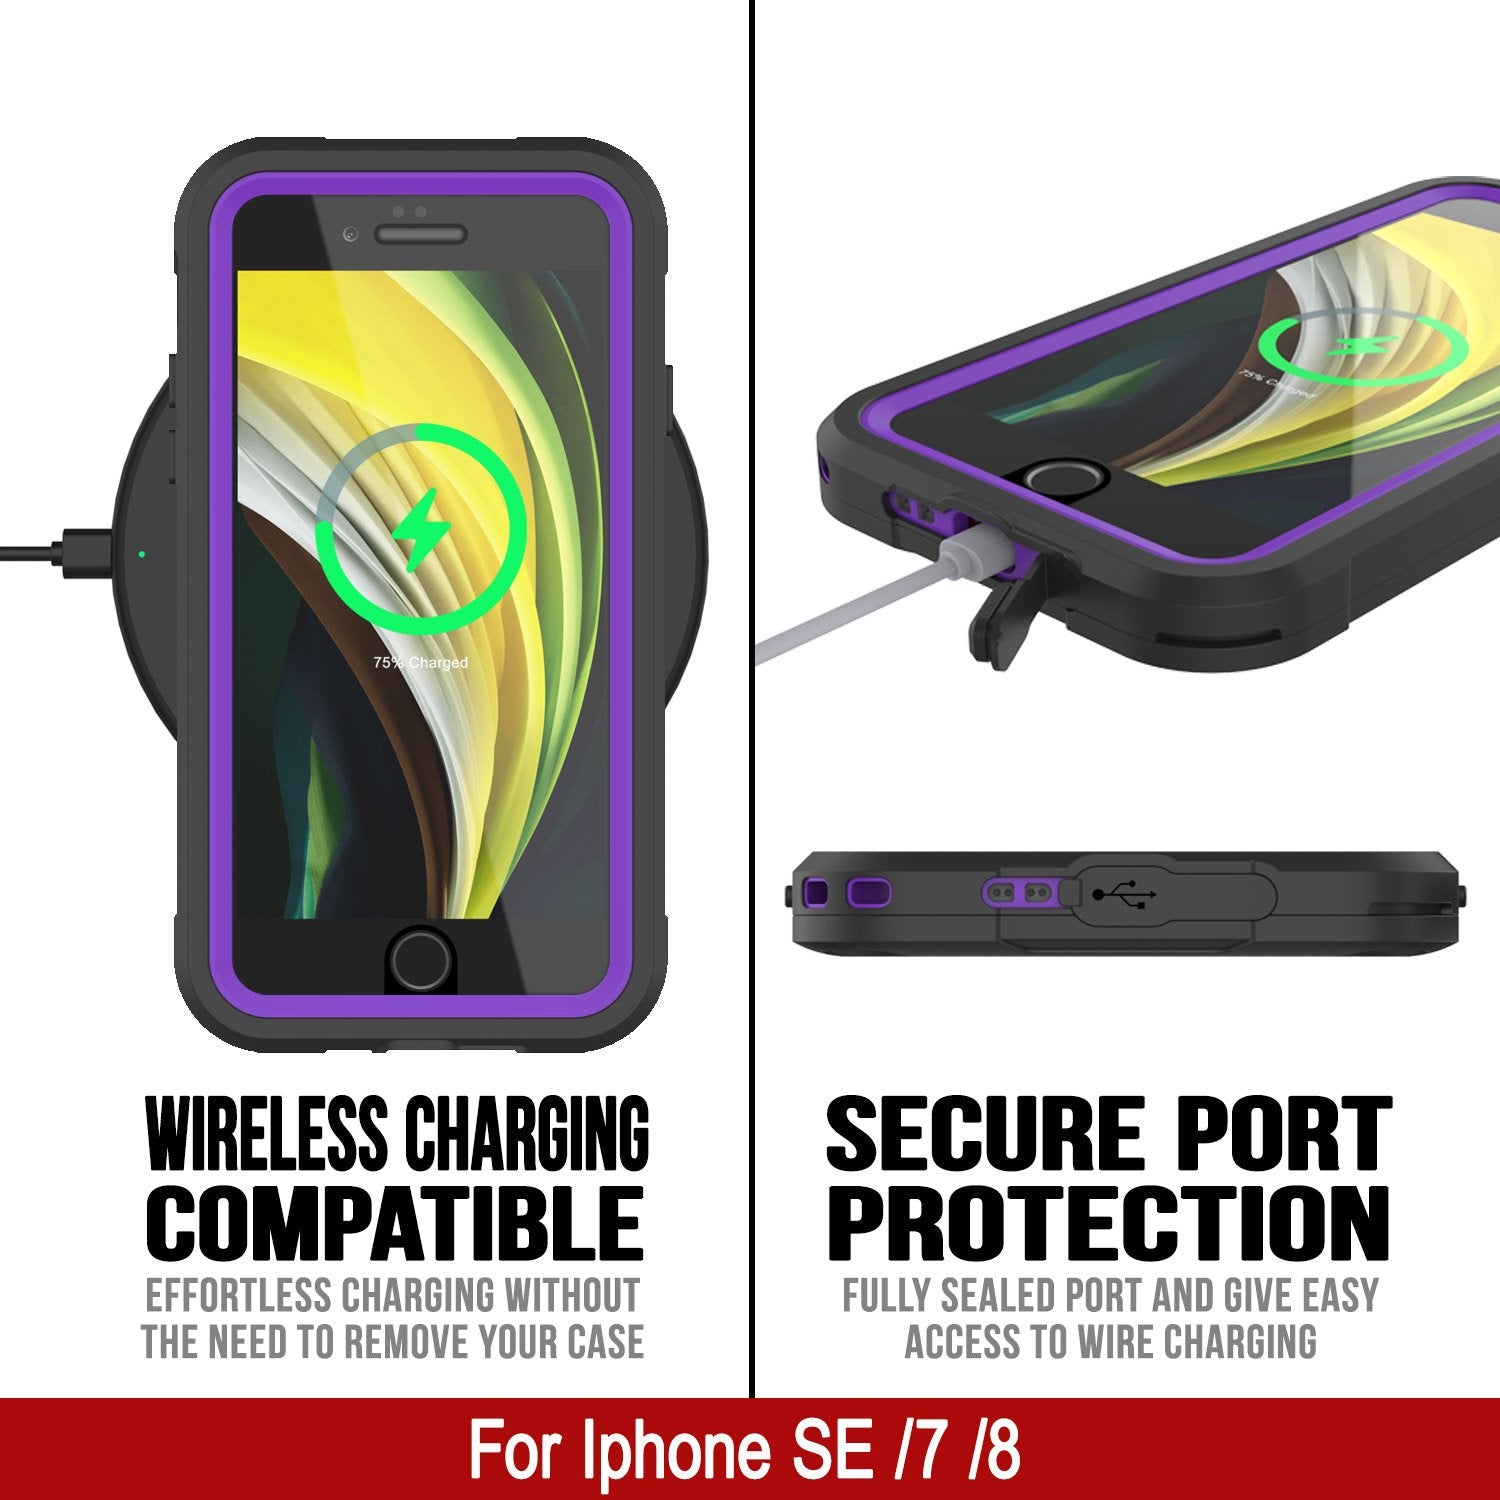 iPhone 8 Waterproof IP68 Case, Punkcase [Purple]  [Maximus Series] [Slim Fit] [IP68 Certified] [Shockresistant] Clear Armor Cover with Screen Protector | Ultimate Protection